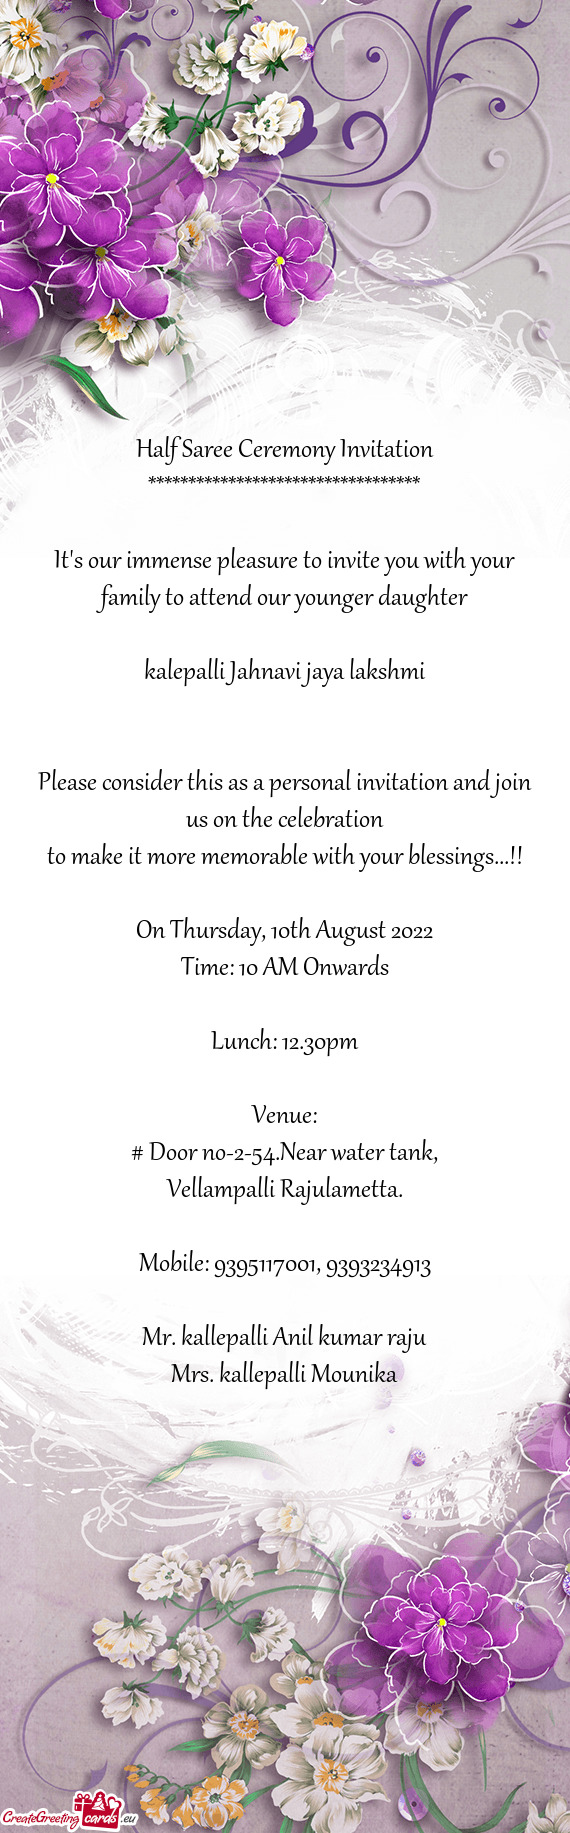 Please consider this as a personal invitation and join us on the celebration